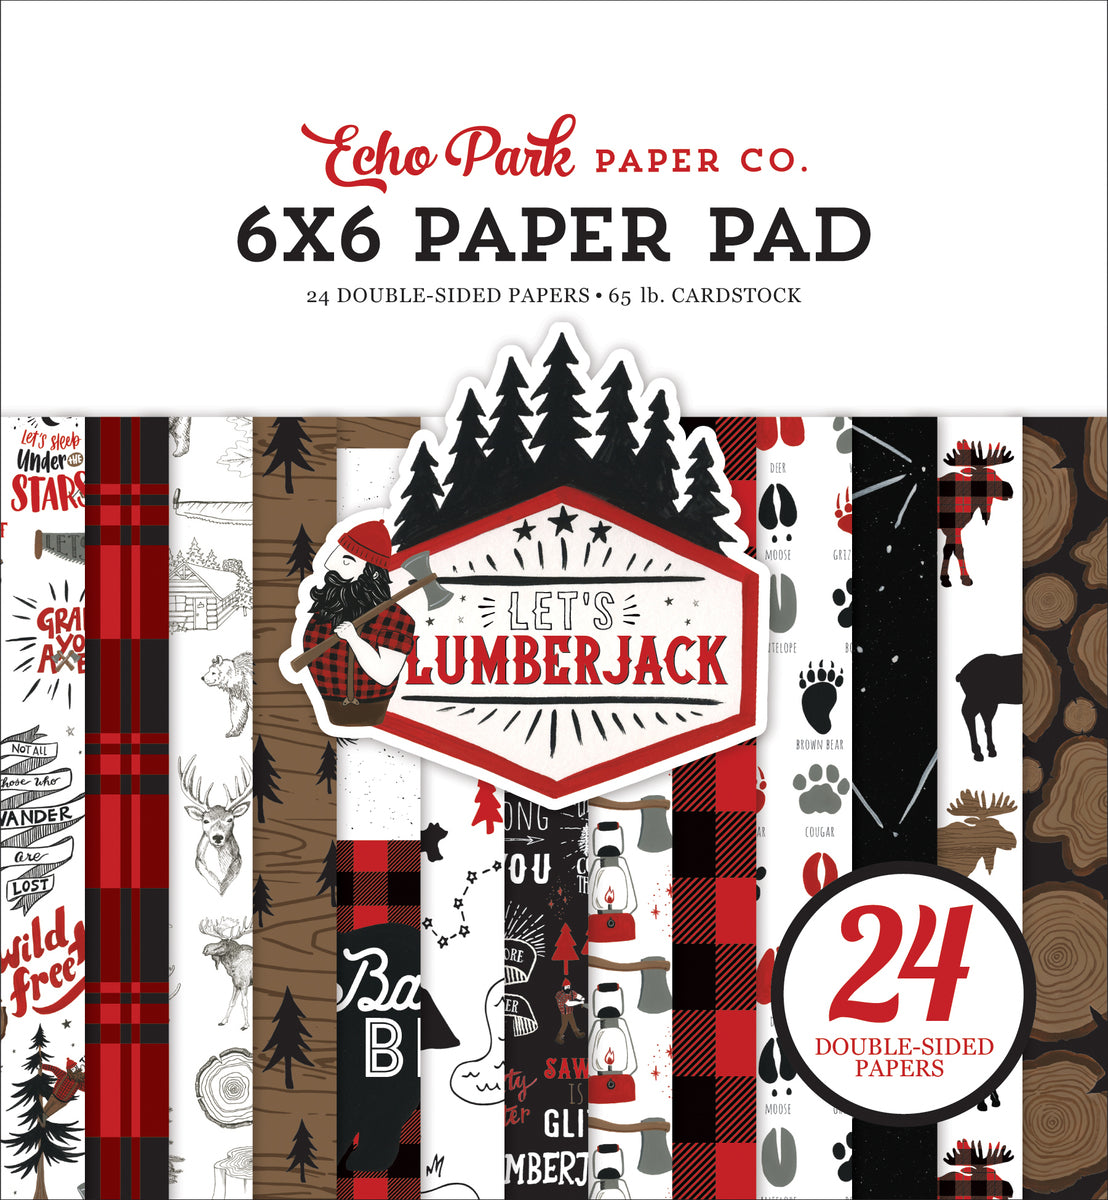 LET'S LUMBERJACK - 6x6 pad with 24 double-sided papers with lumberjack theme - Echo Park Paper Co.